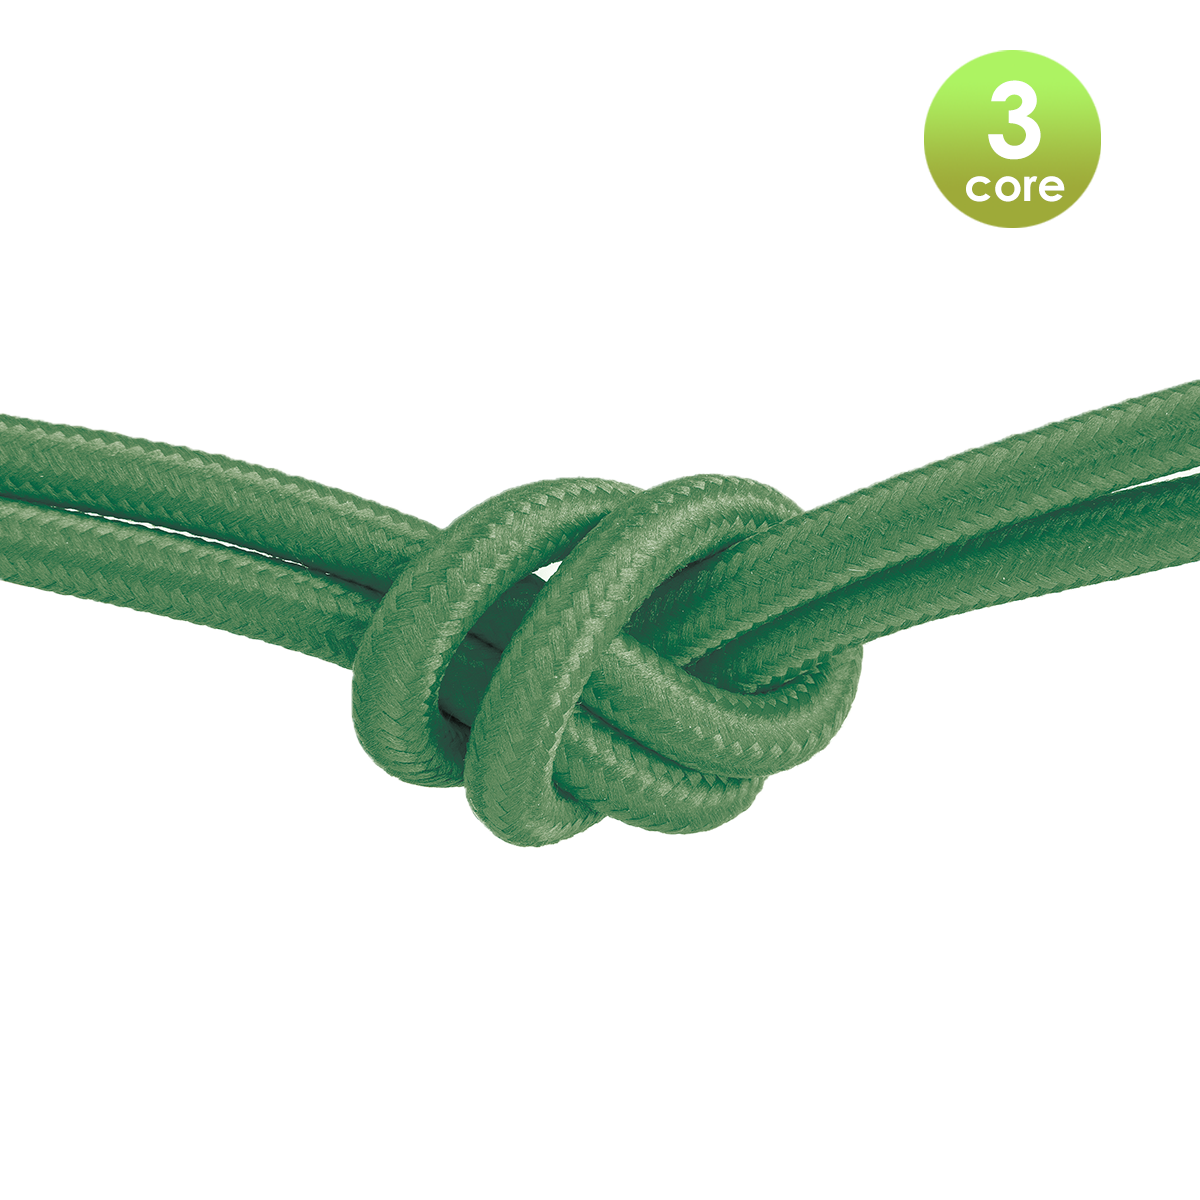 Tangla lighting - TLCB01014GN - 3c - Fabric cable 3 core - in sage green